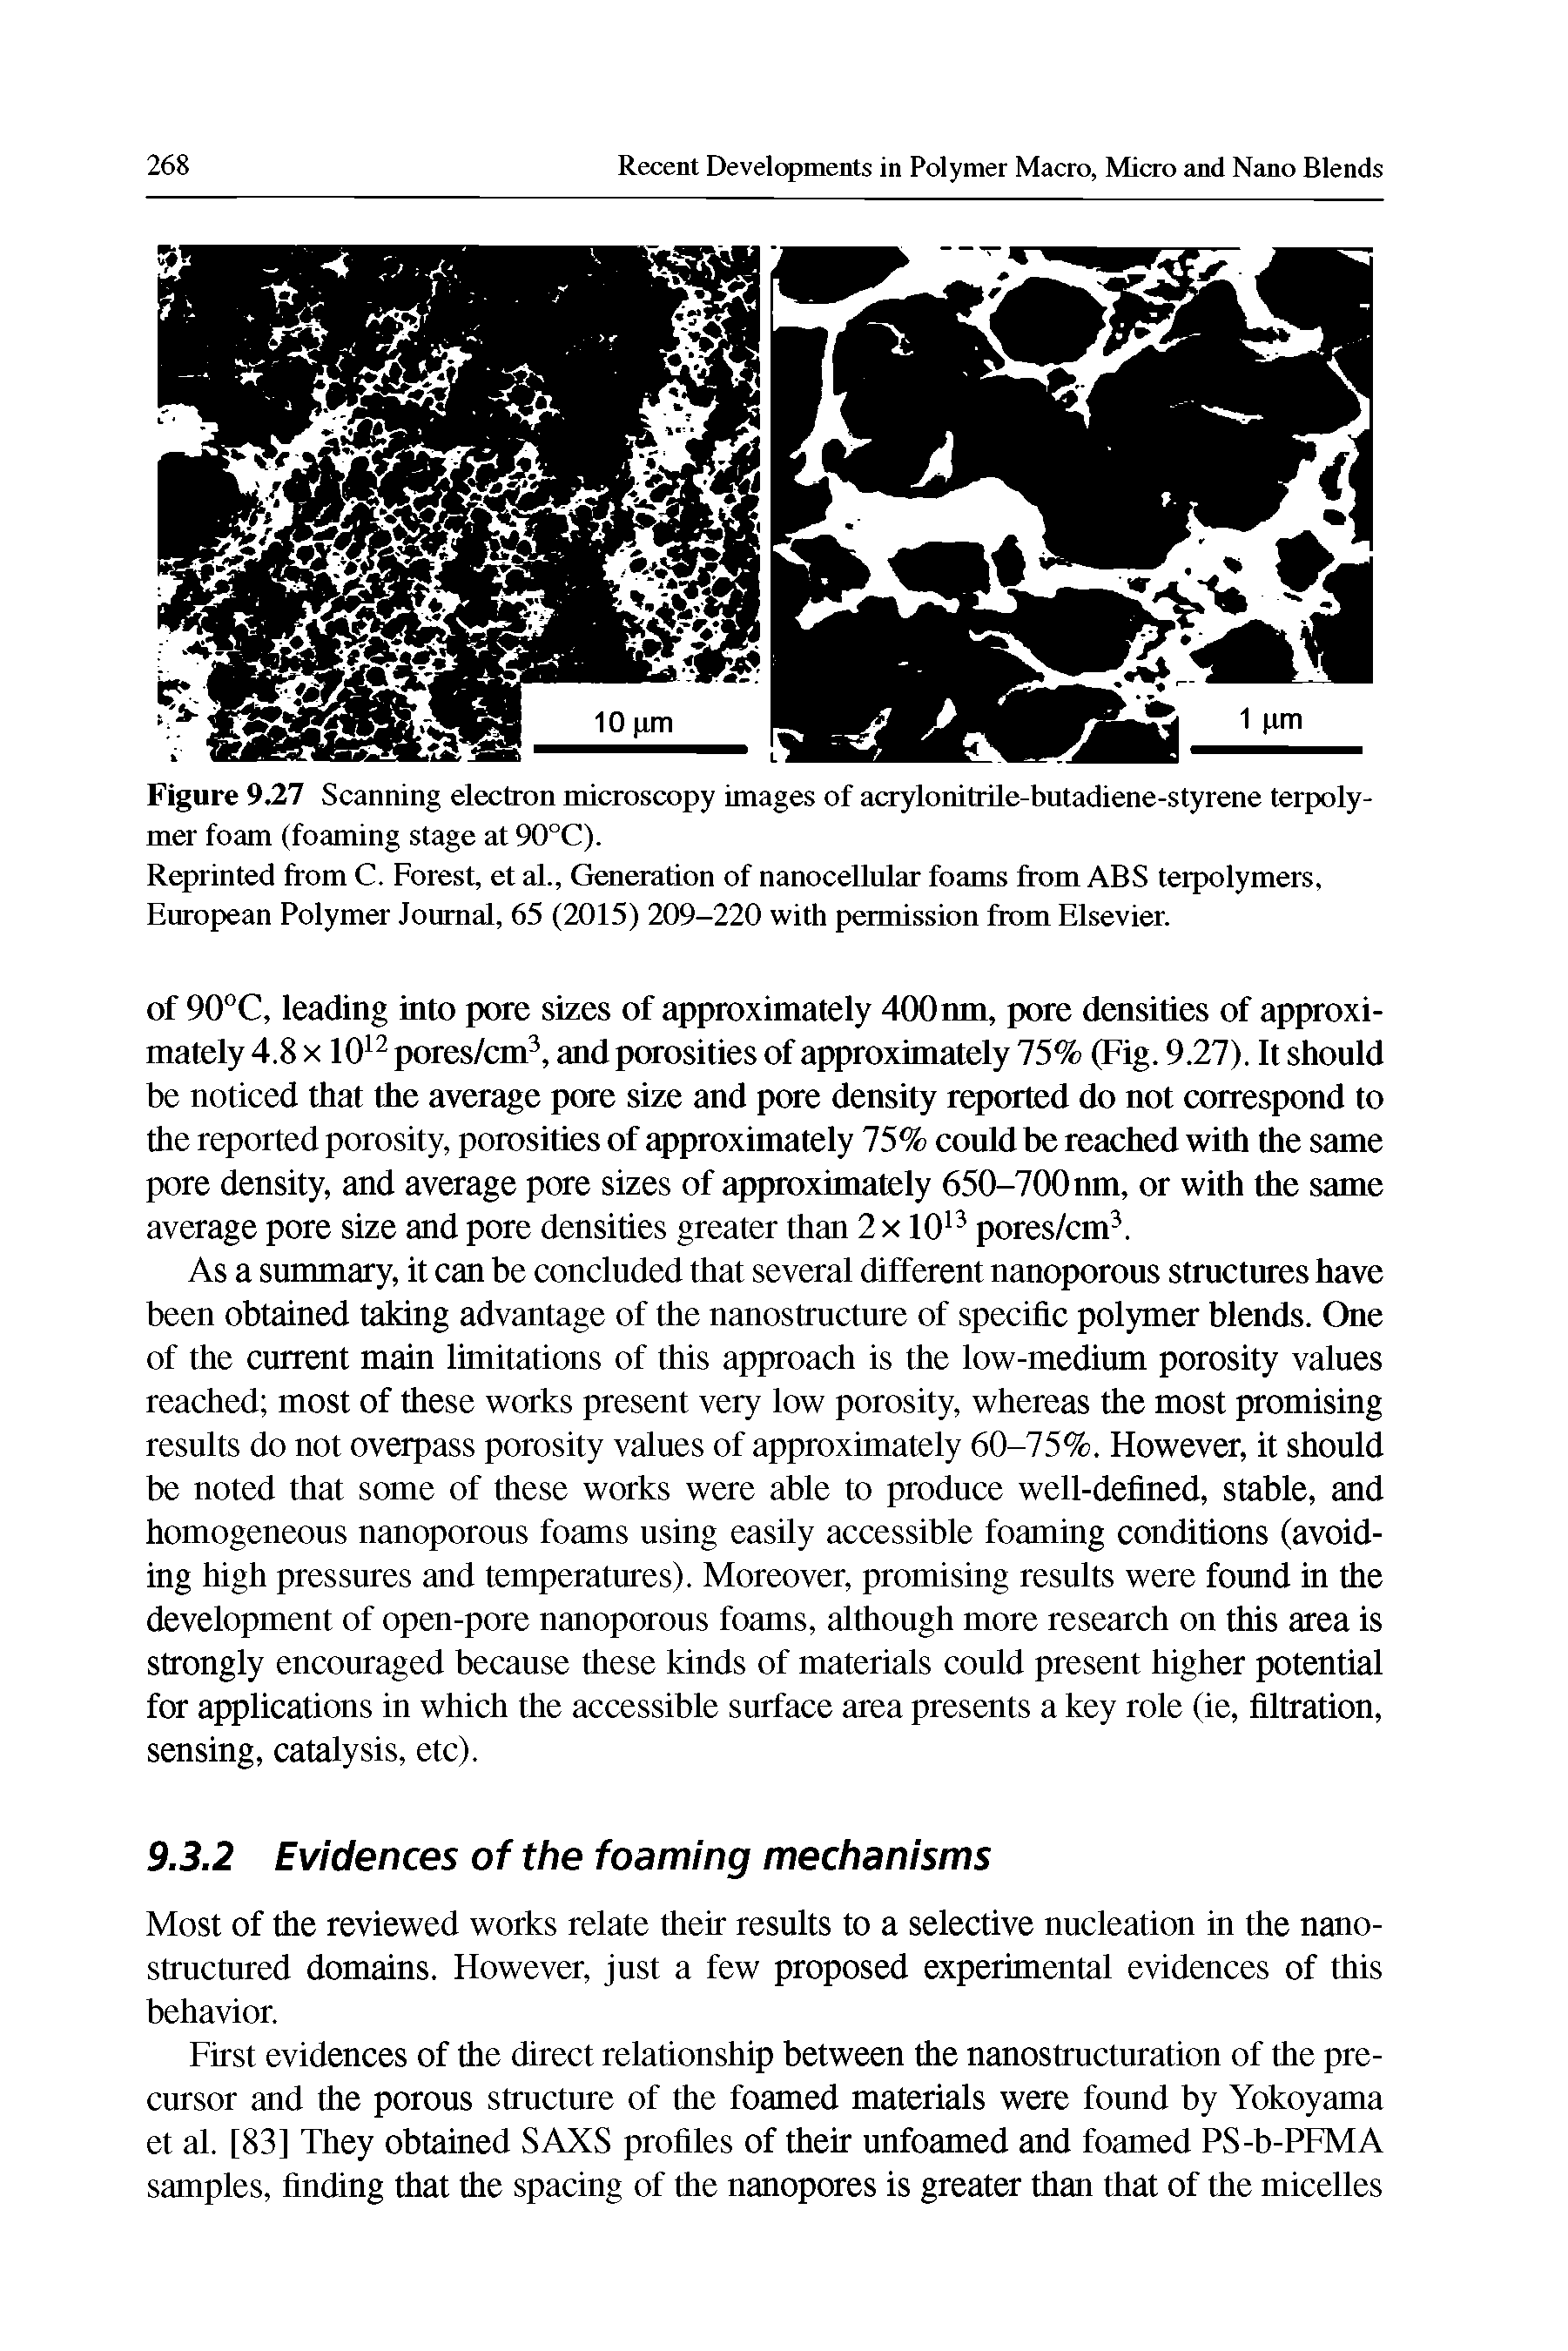 Figure 9,27 Scanning electron microscopy images of acrylonitrile-butadiene-styrene terpoly-mer foam (foaming stage at 90°C).